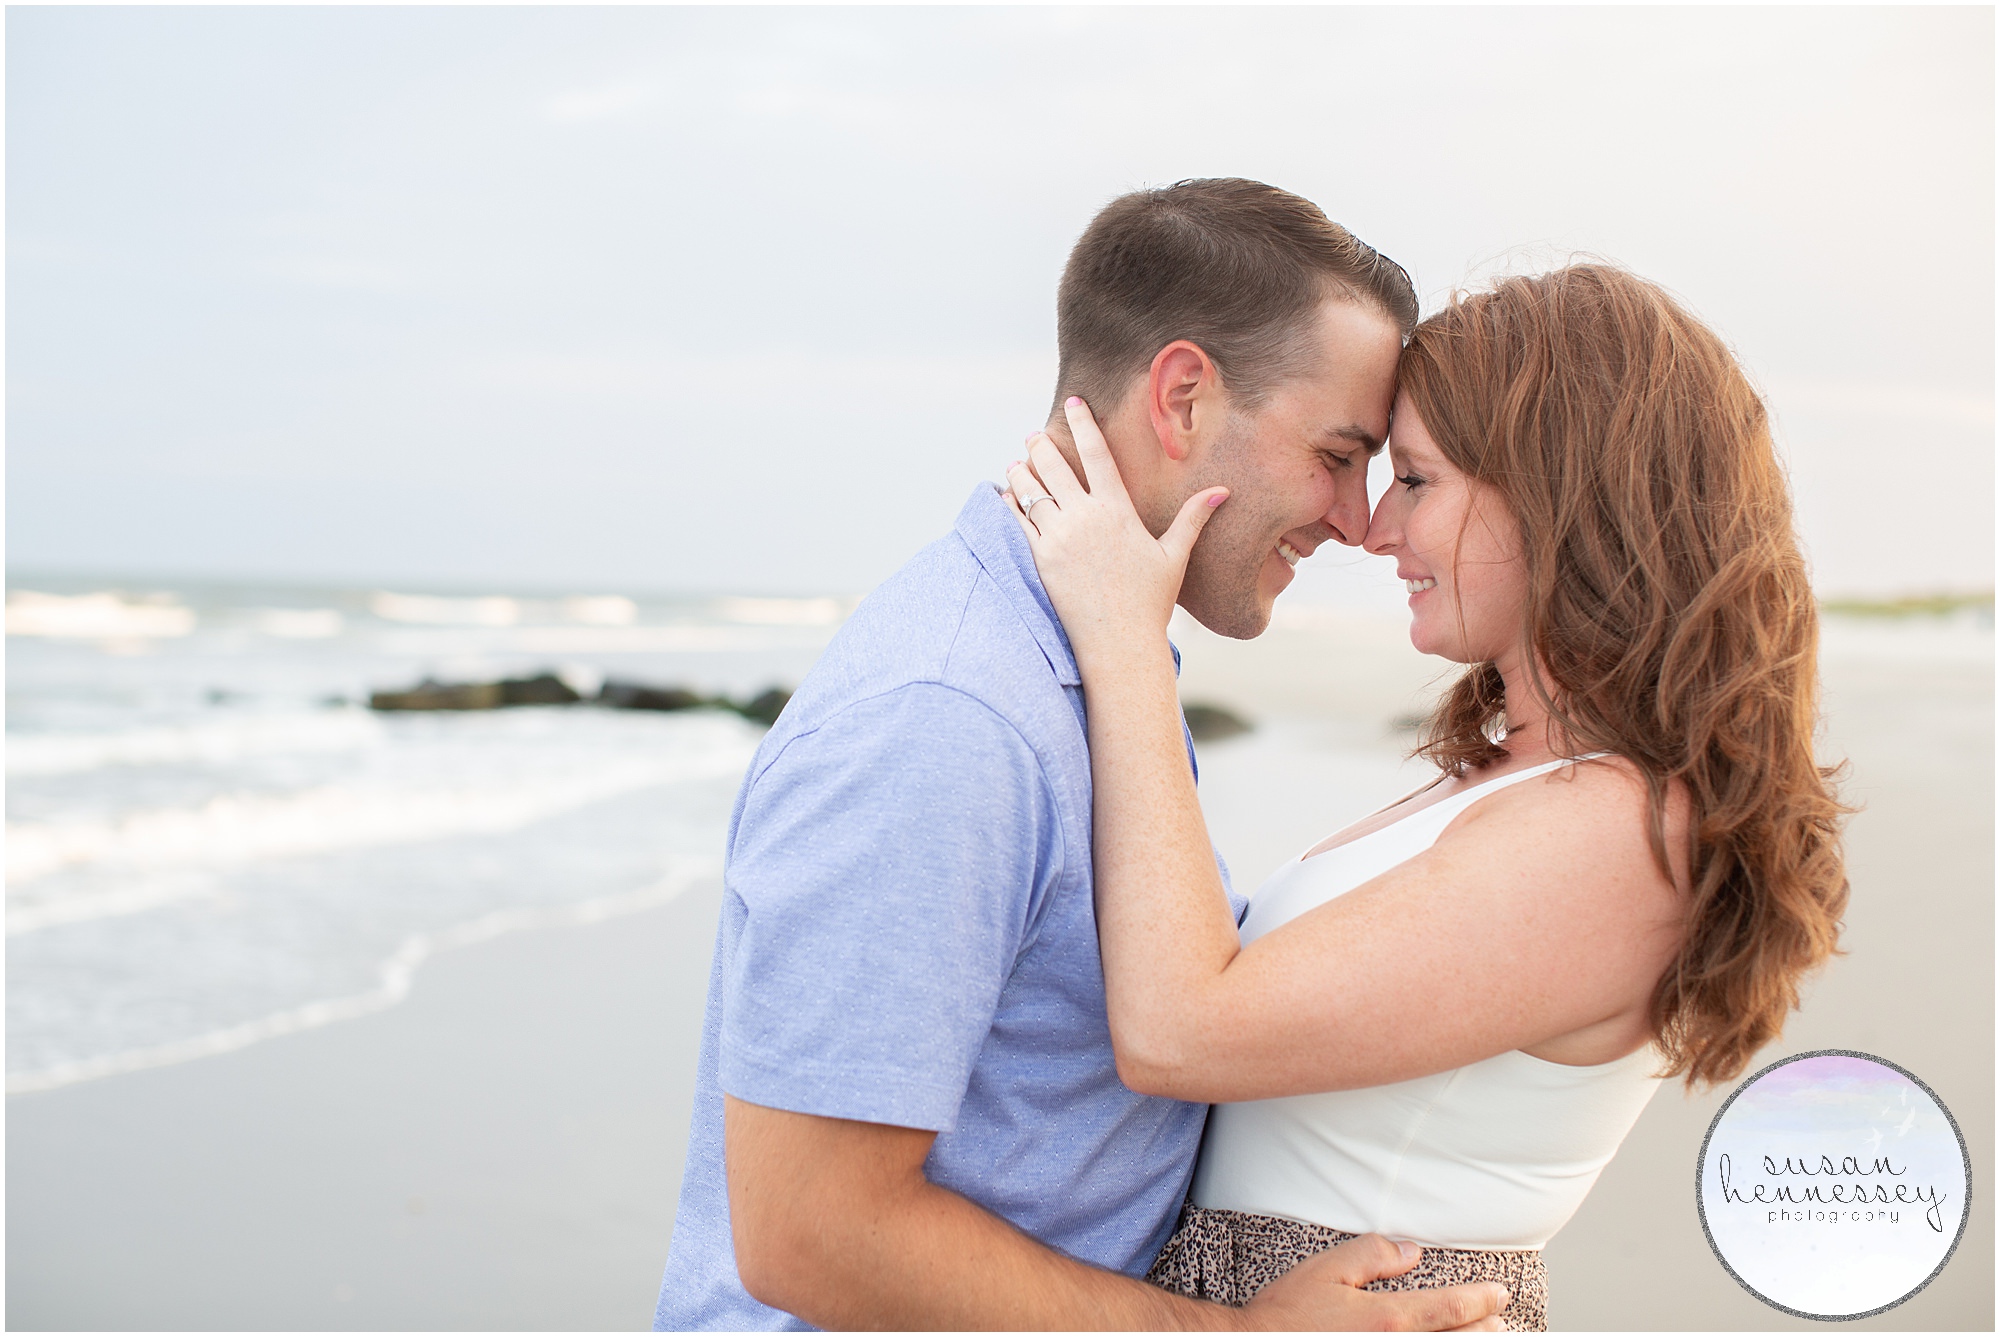 Engagement session after the surprise proposal at the Jersey Shore